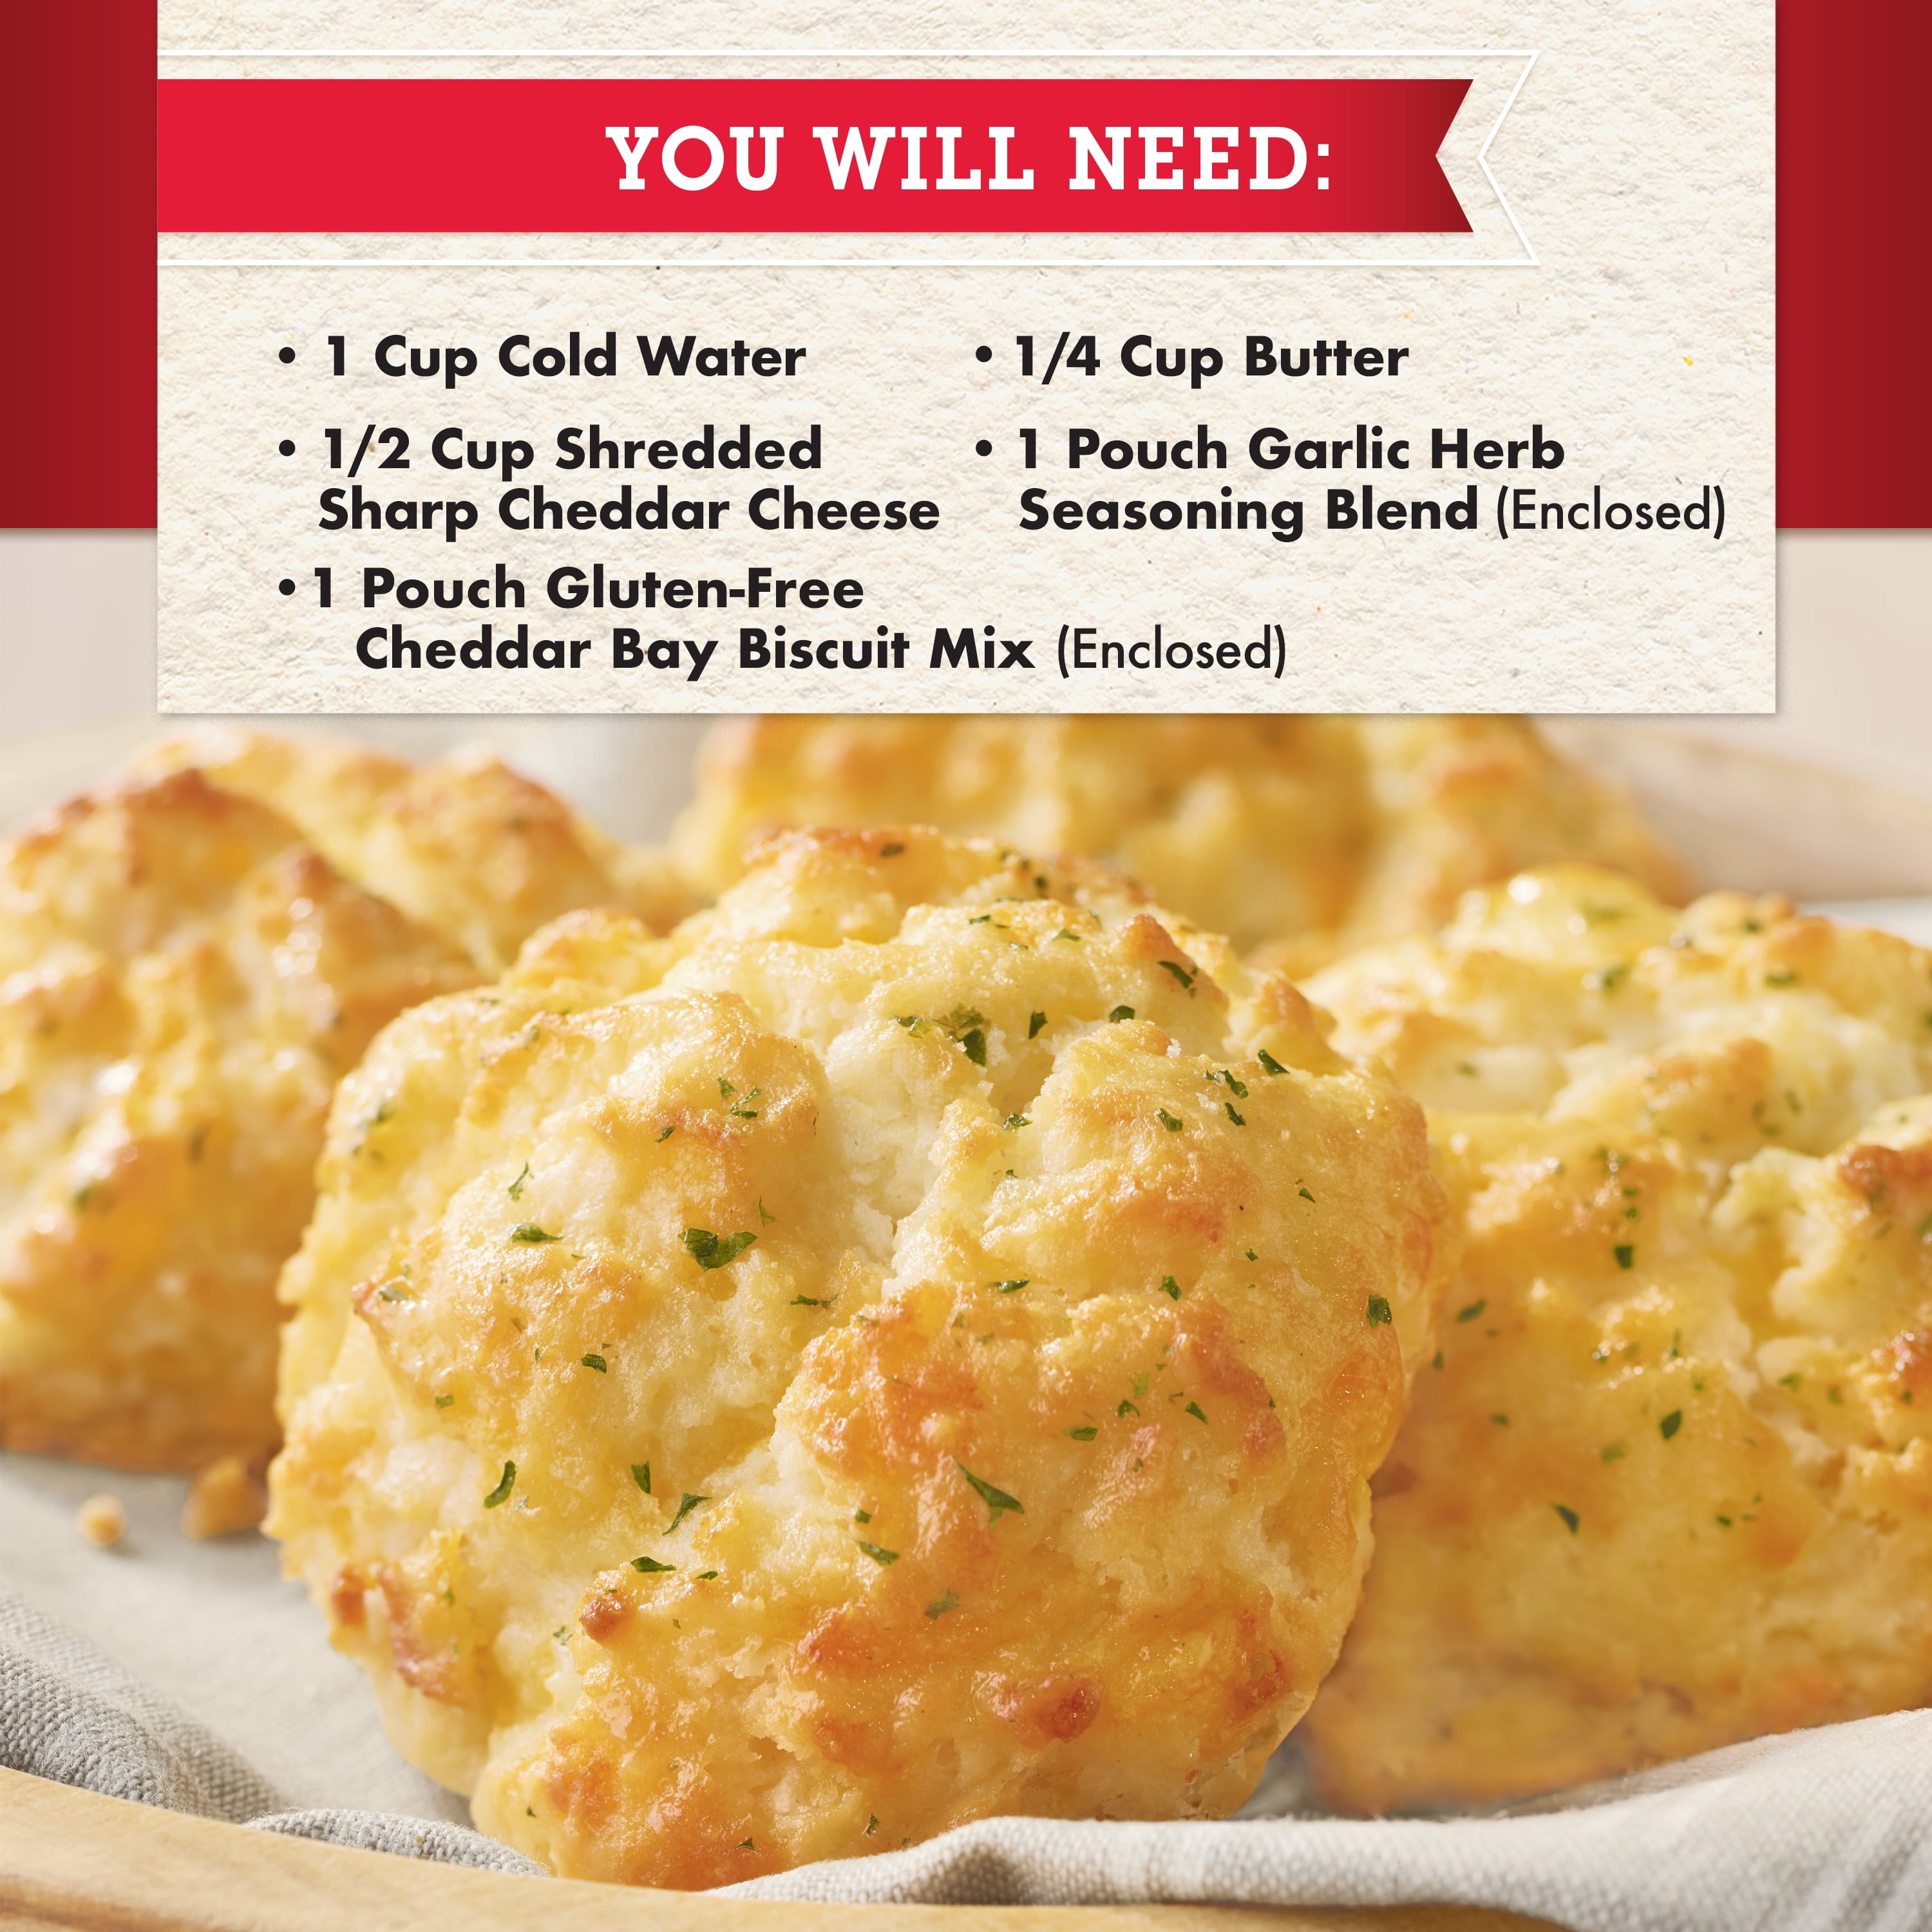 Red Lobster Cheddar Bay Biscuit Mix 11.36 oz, Bread, Muffin & Scone Mix